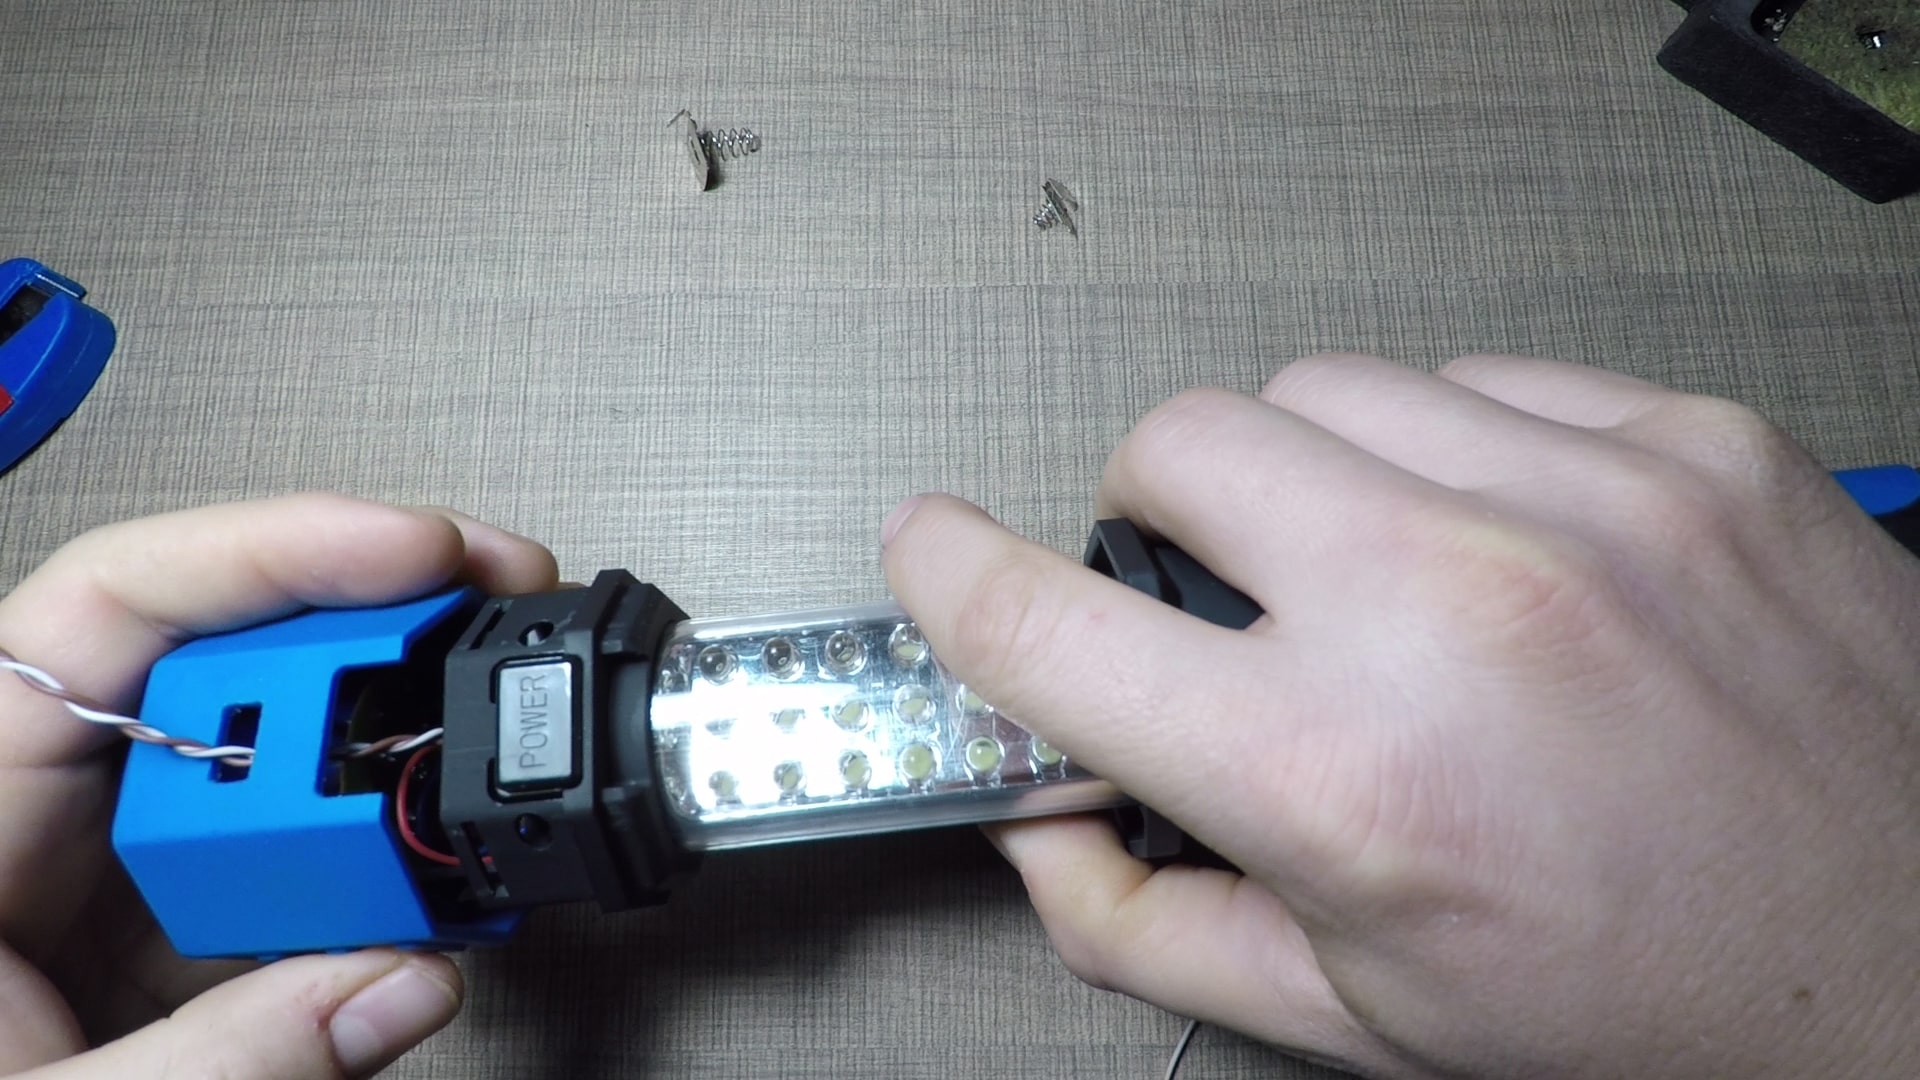 Assembly of the modified flashlight.